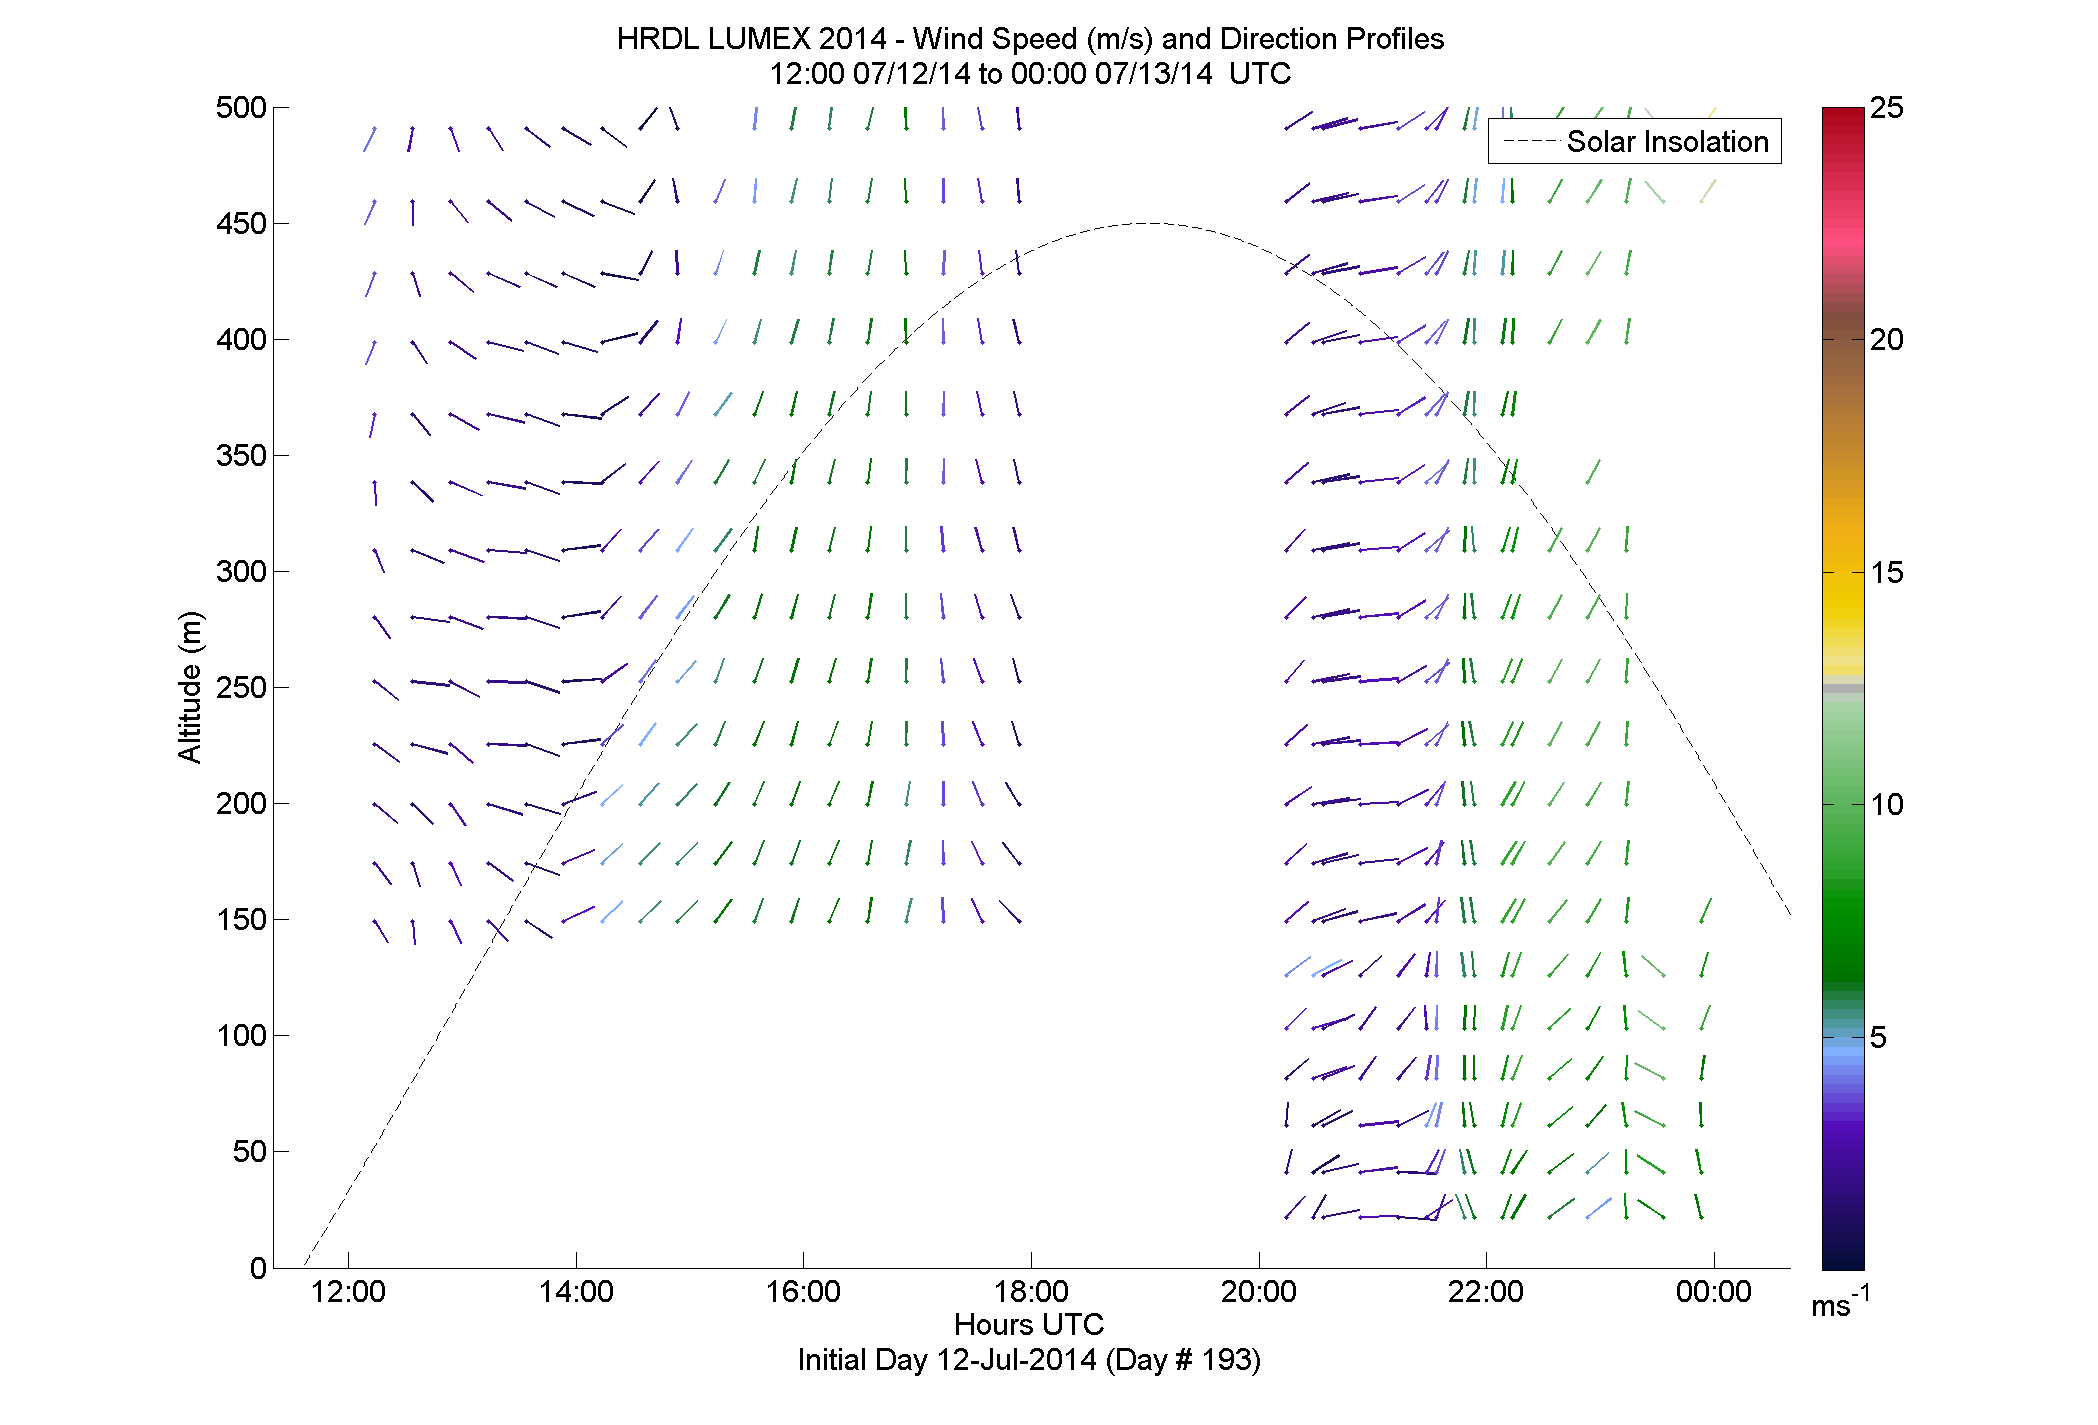 HRDL speed and direction profile - July 12 pm